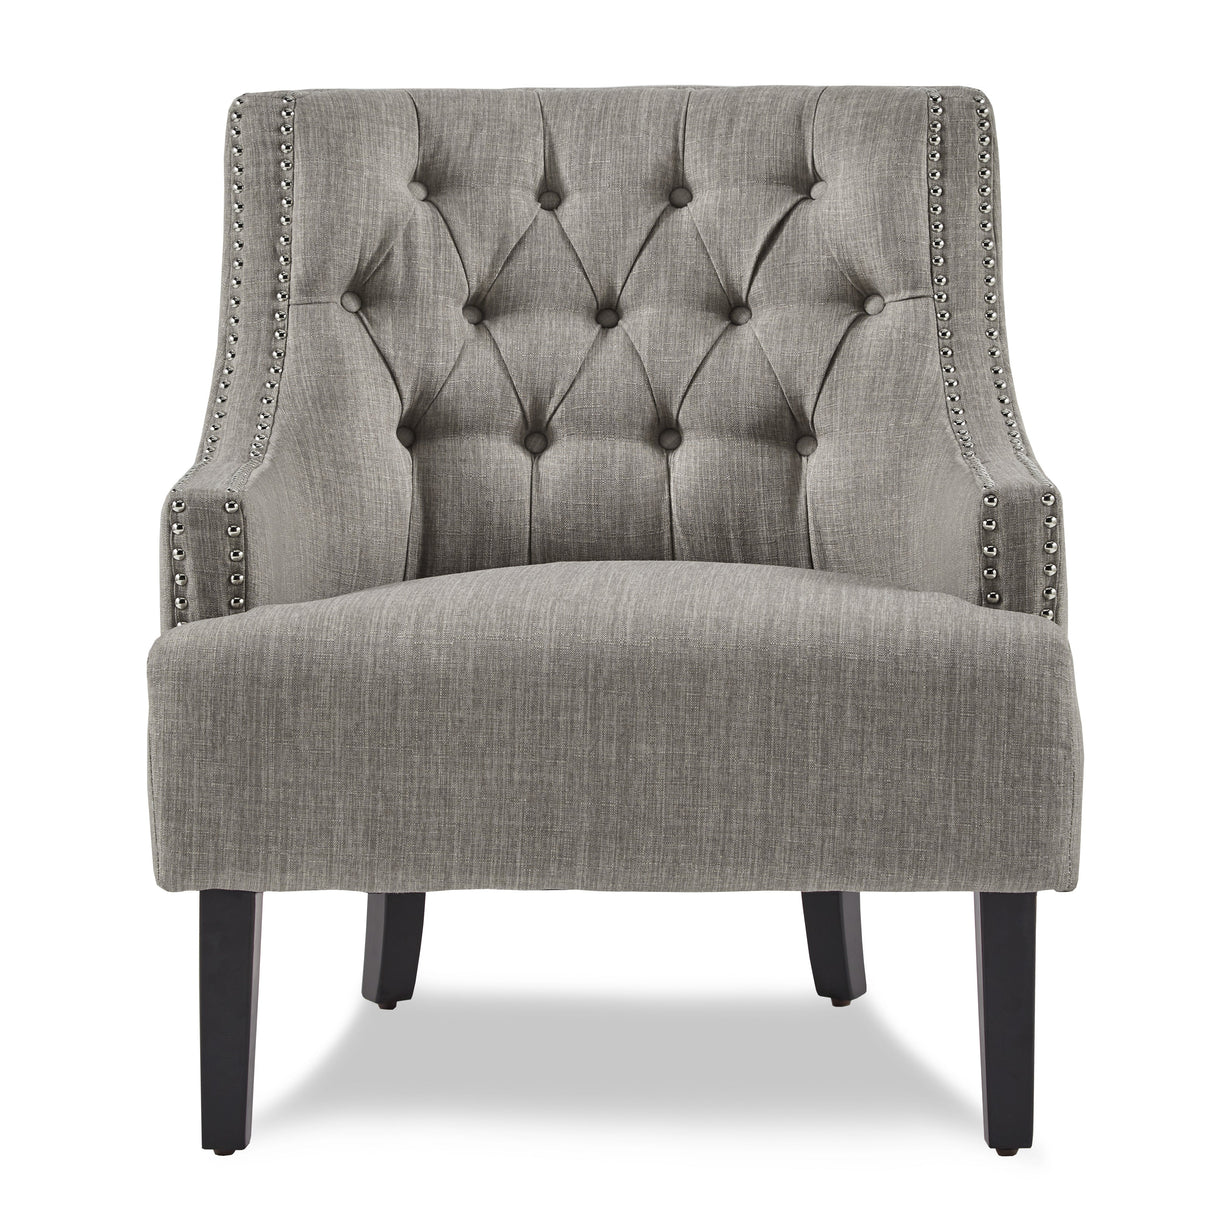 Charisma Taupe Accent Chair